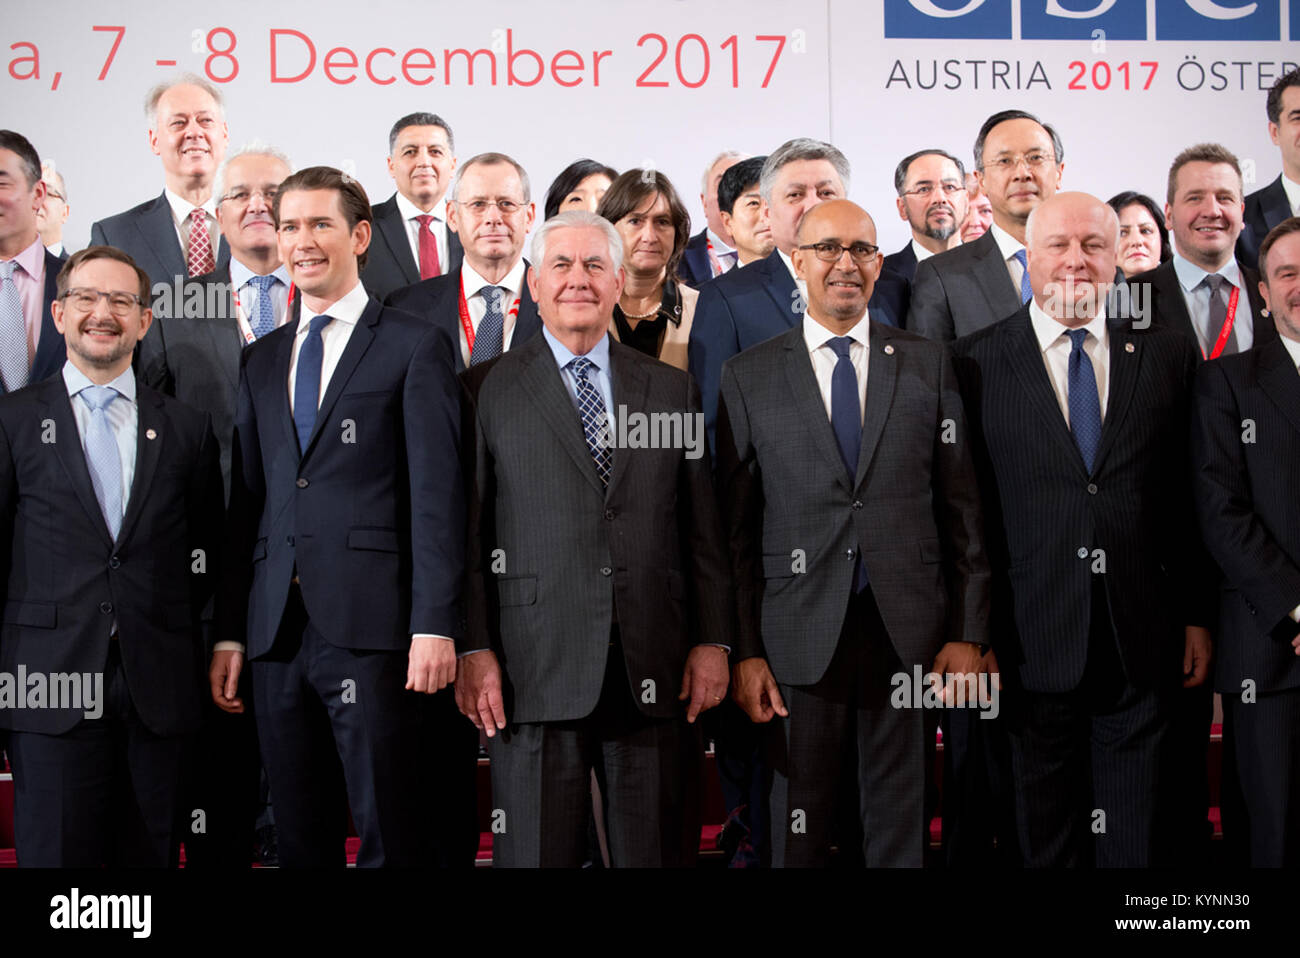 U.S. Secretary of State Rex Tillerson  participates in a family photo at the 2017 Organization for Security and Co-operation in Europe (OSCE) Ministerial Council in  Vienna, Austria on December 7, 2017. Stock Photo